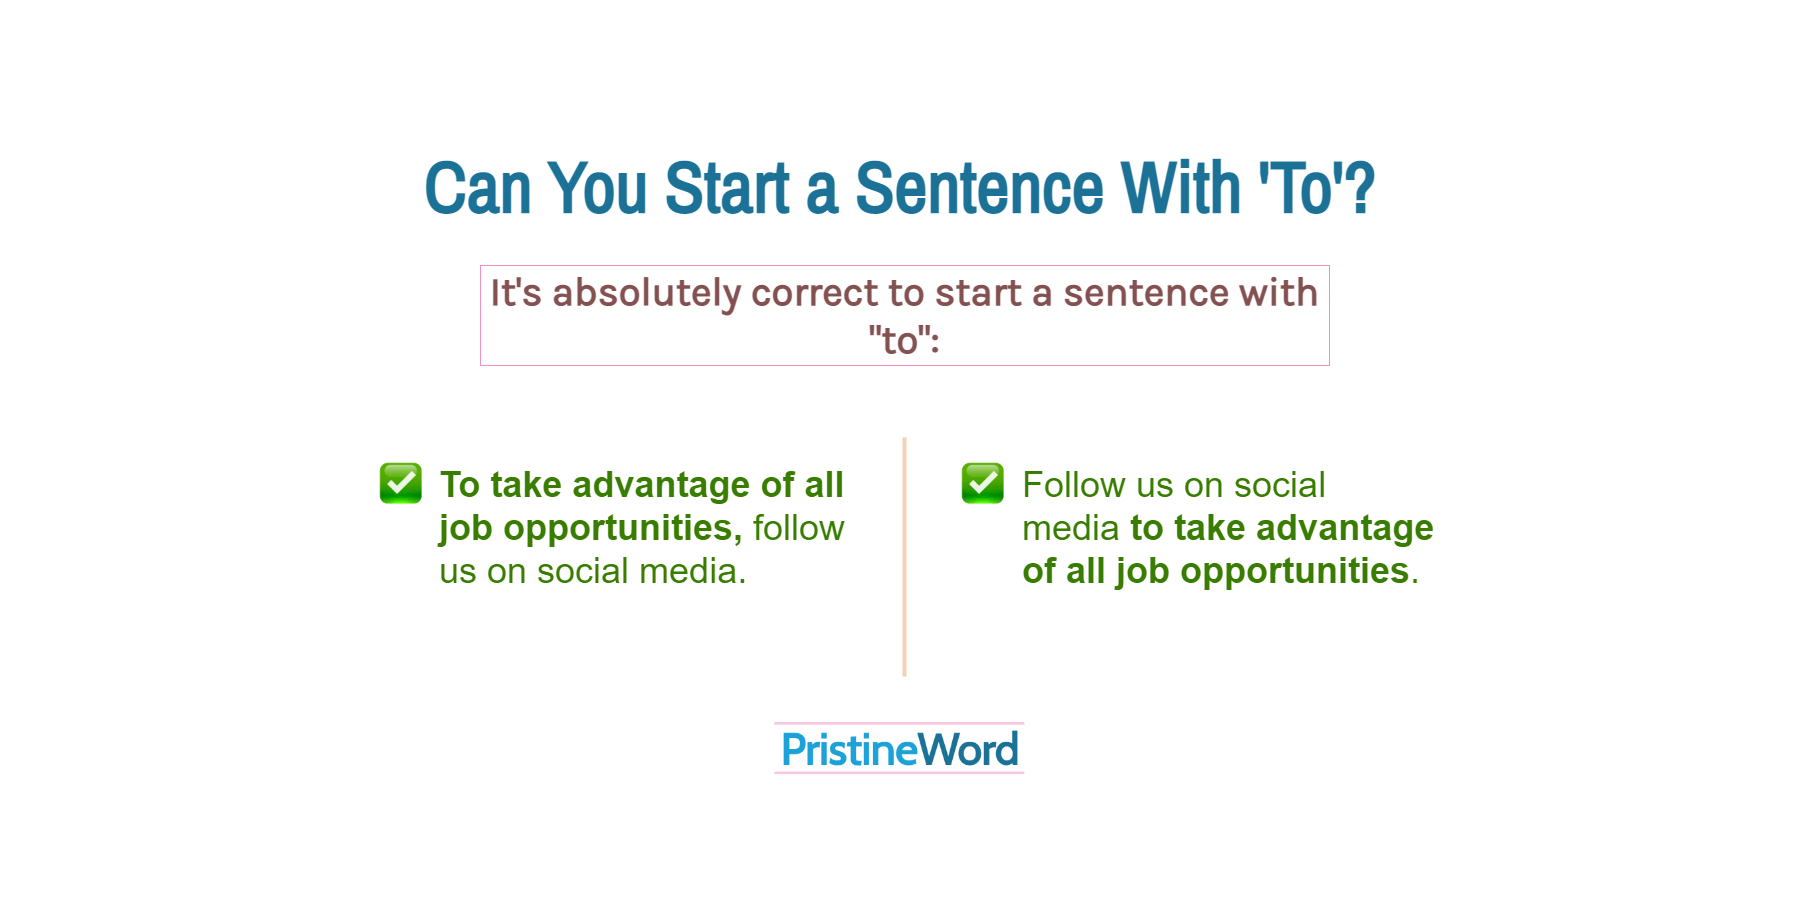 Can You Start a Sentence With 'To'?